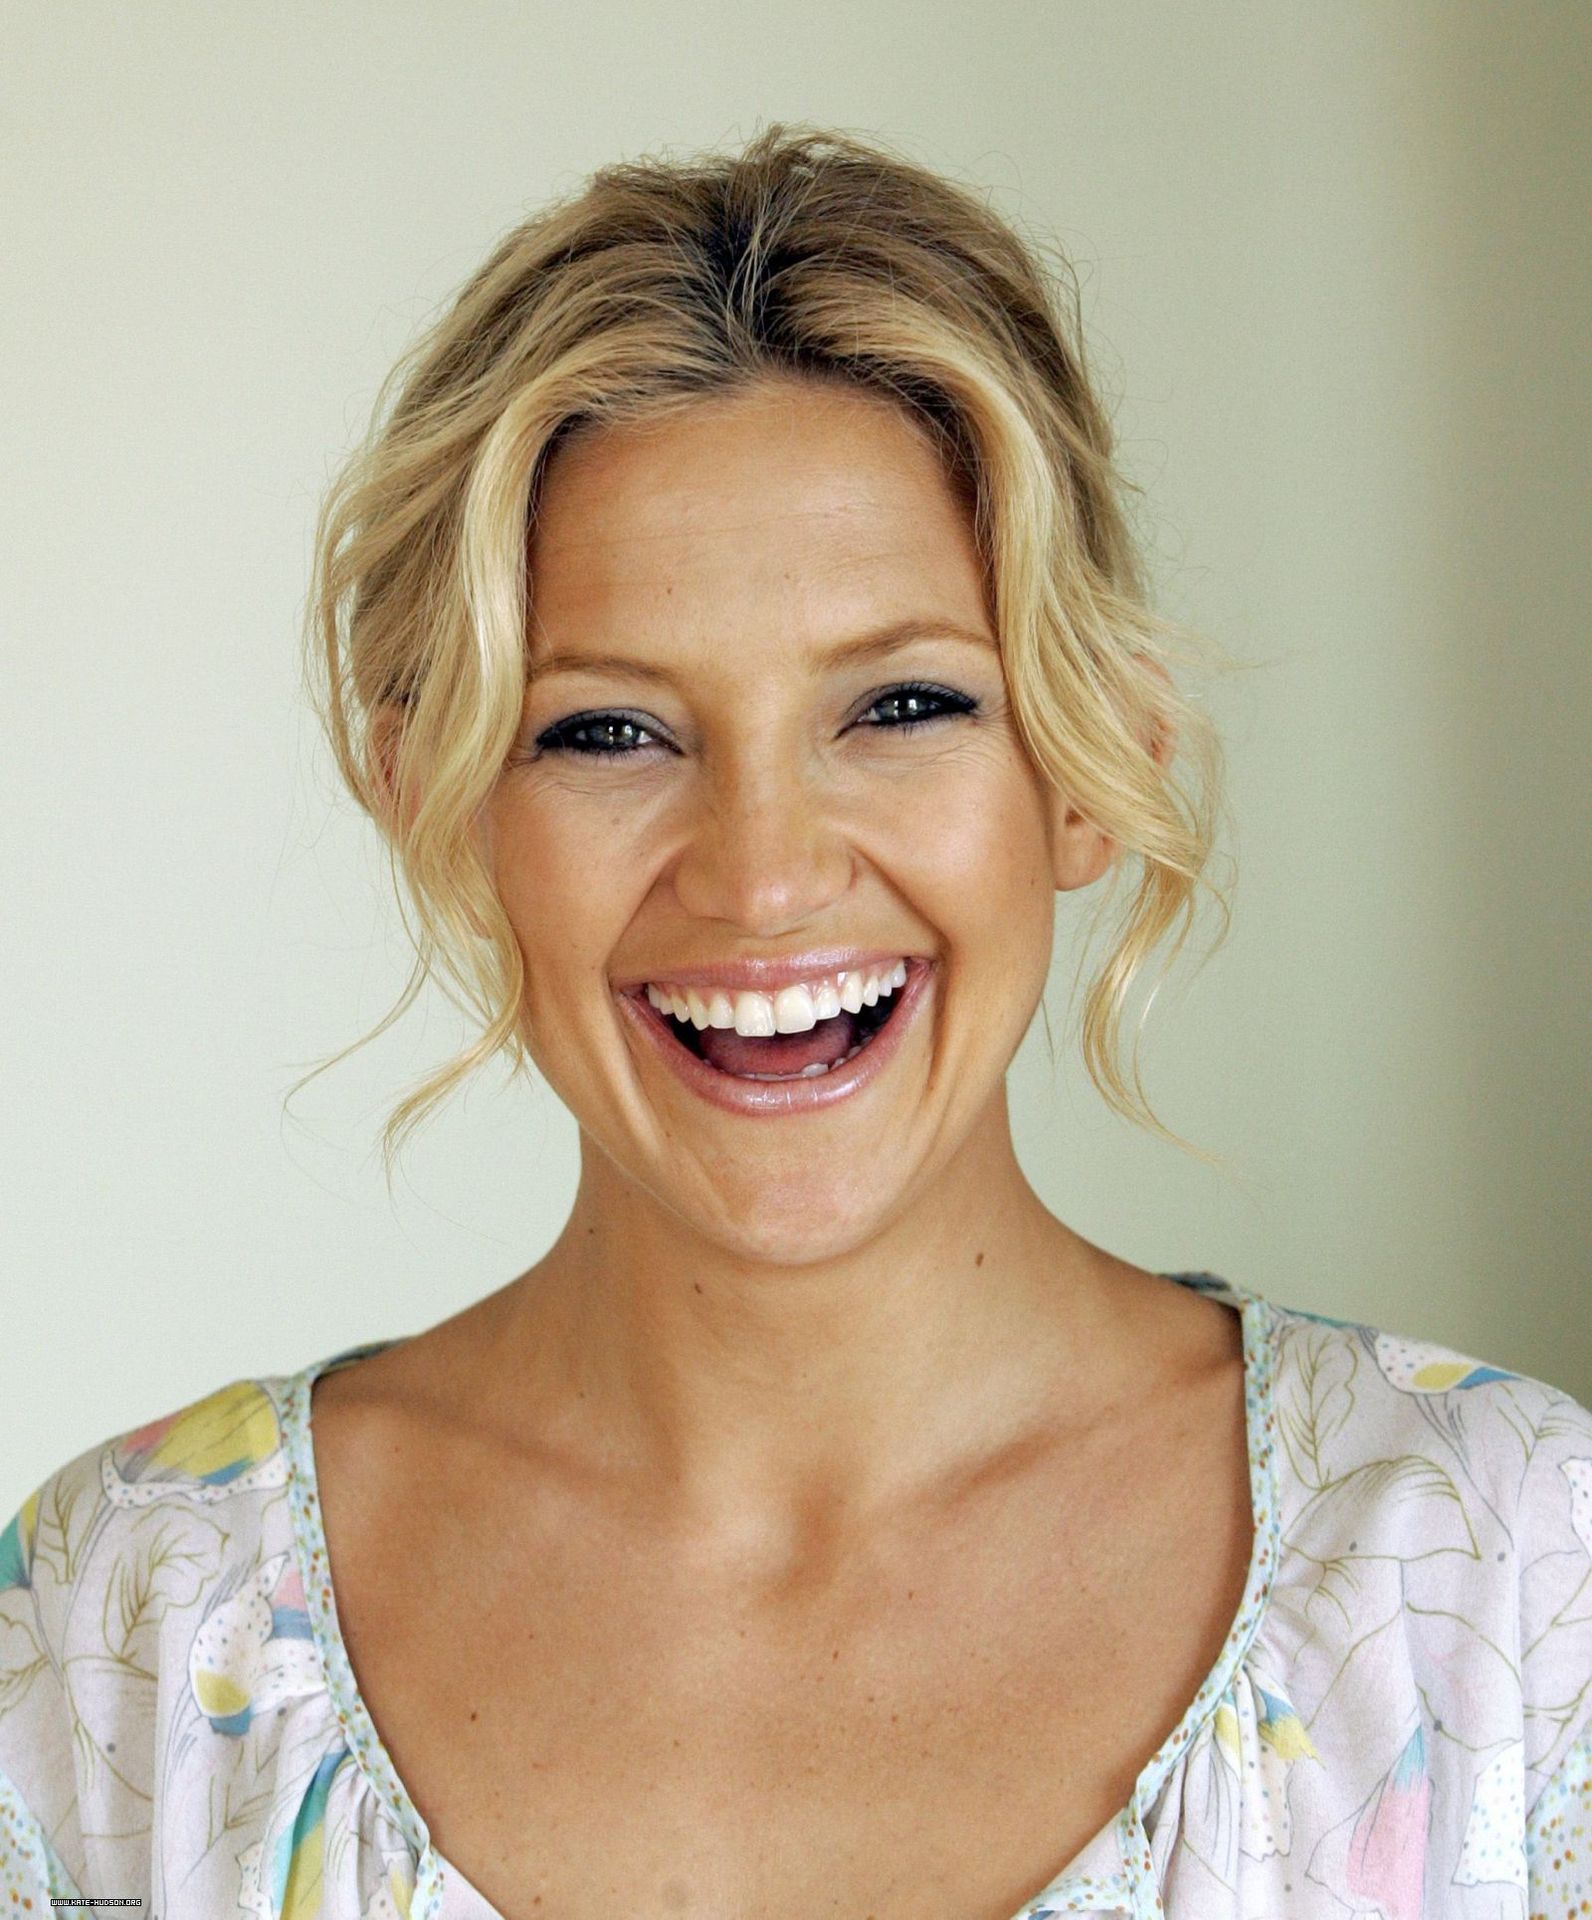 Kate Hudson: Actor, daughter of Goldie Hawn and Bill Hudson.